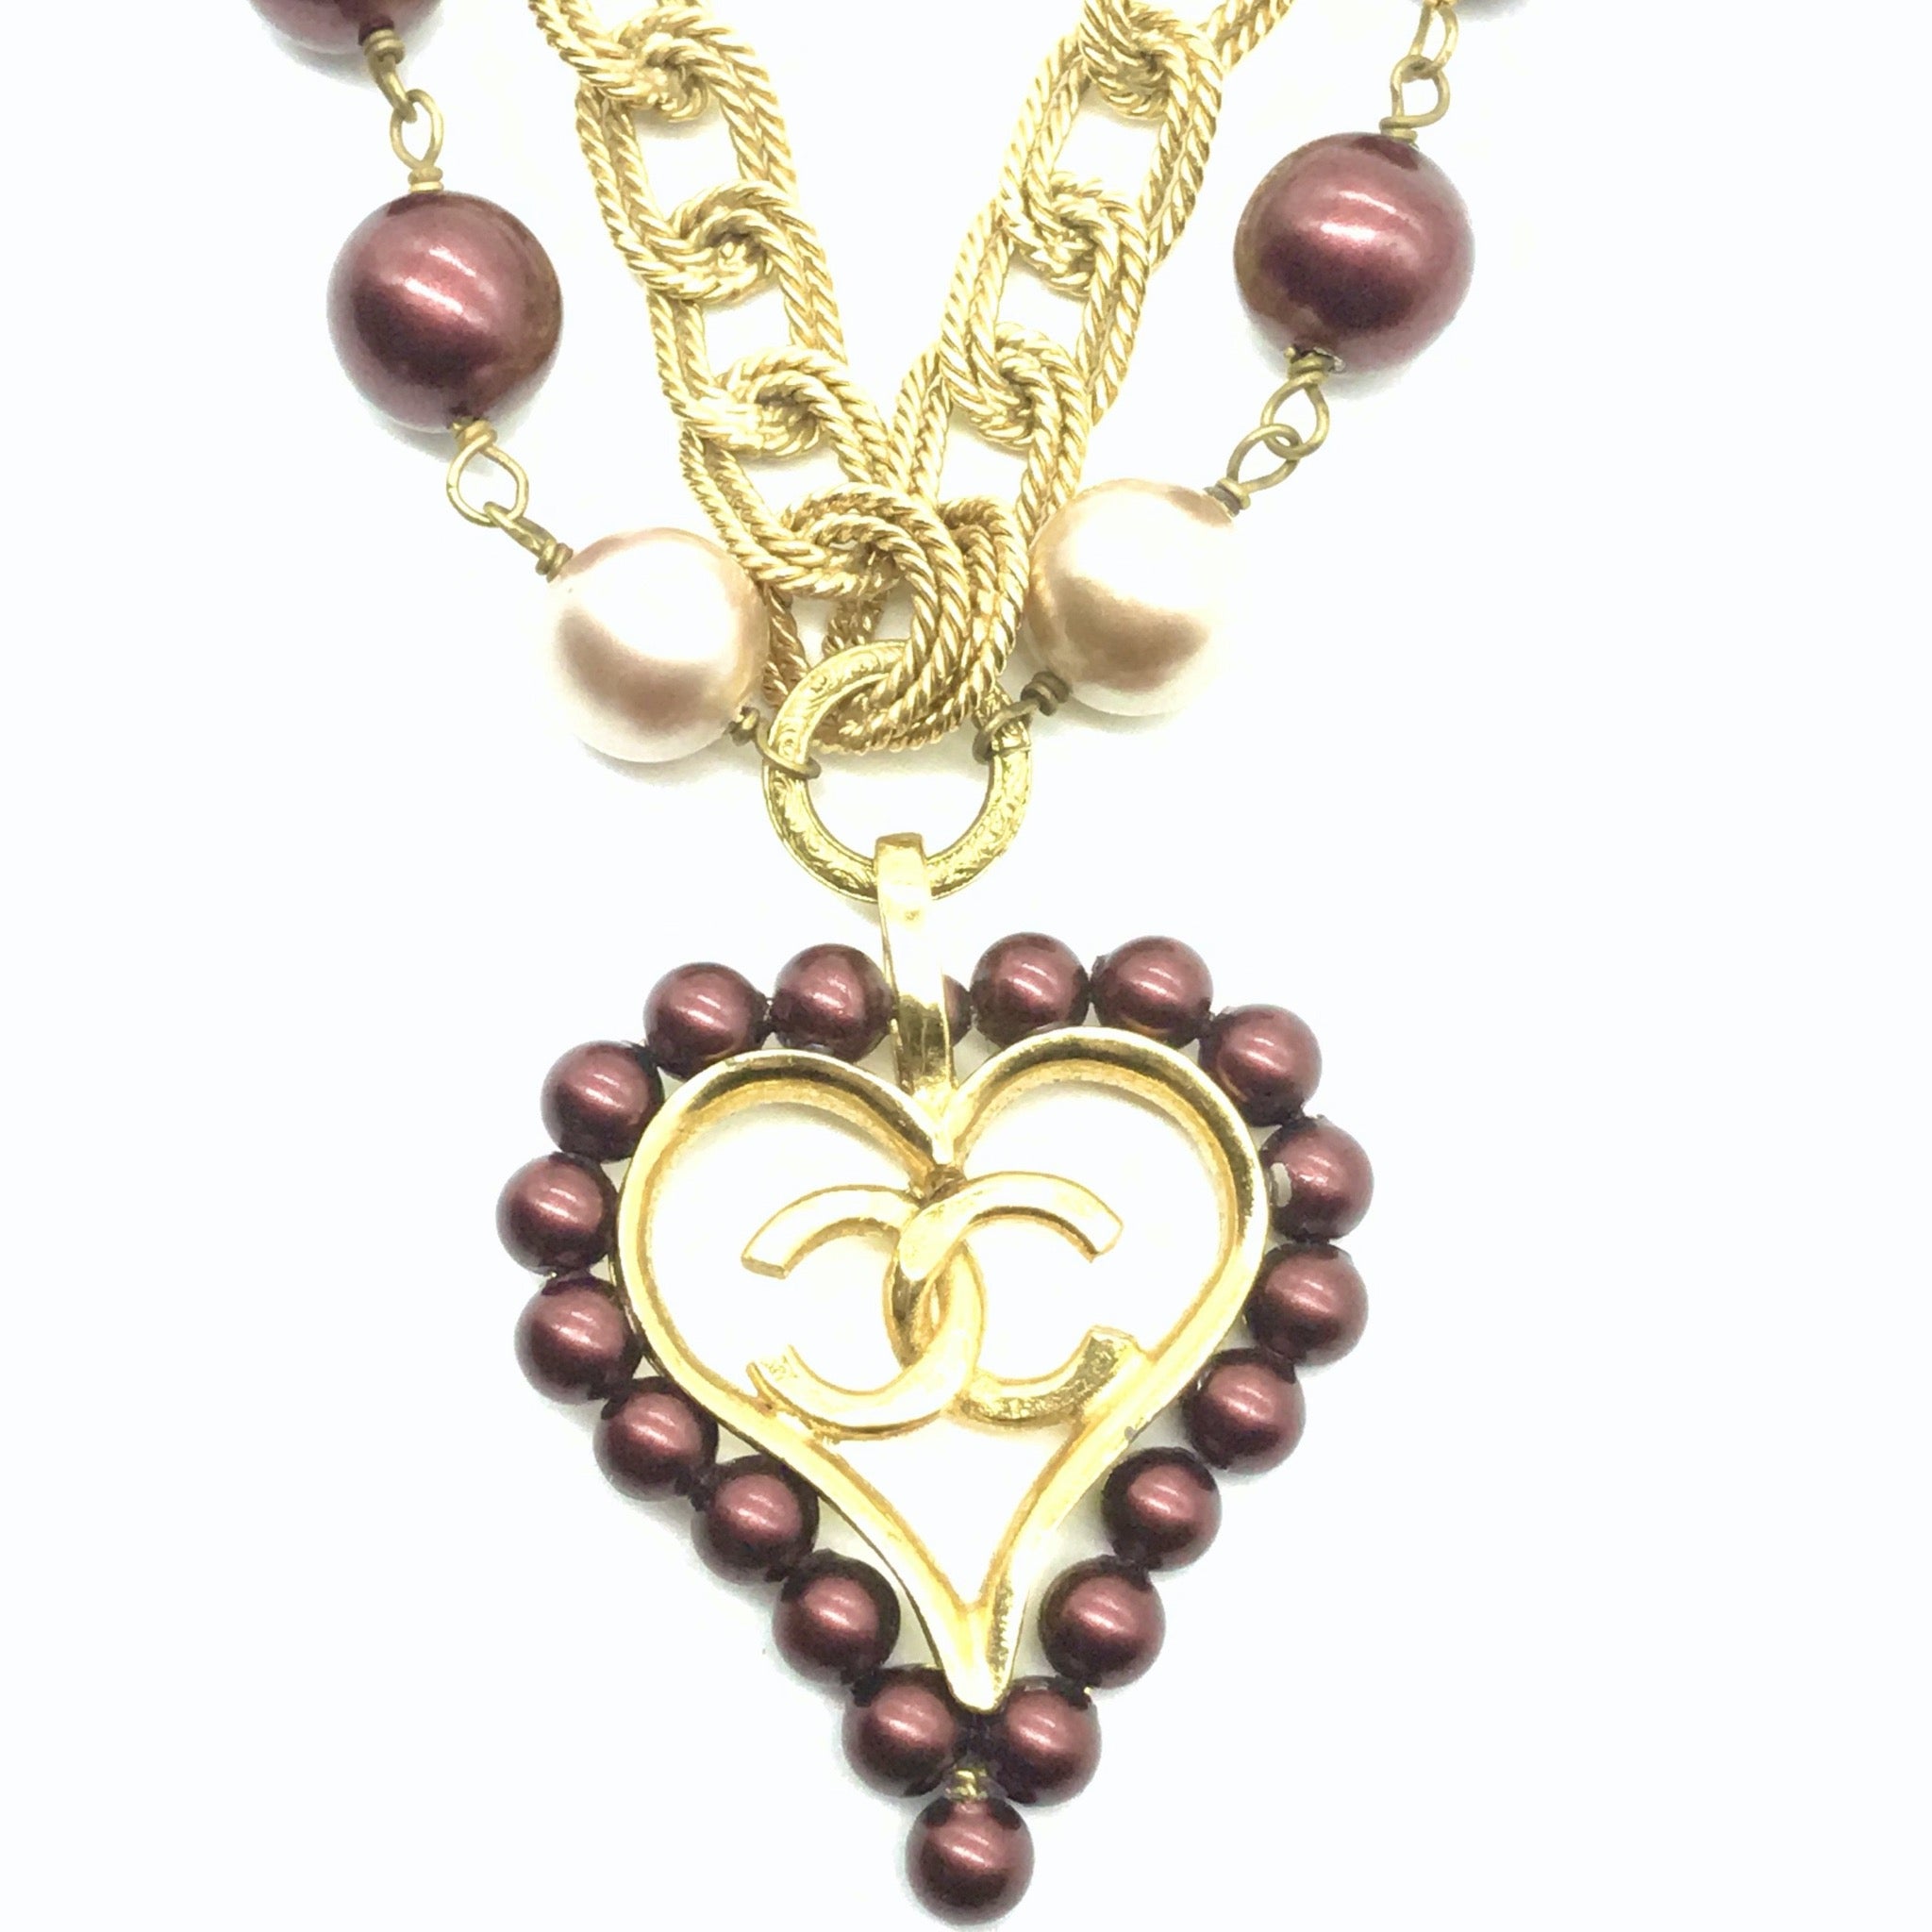 Repurposed dreamy Chanel Heart Necklace Real freshwater pearls